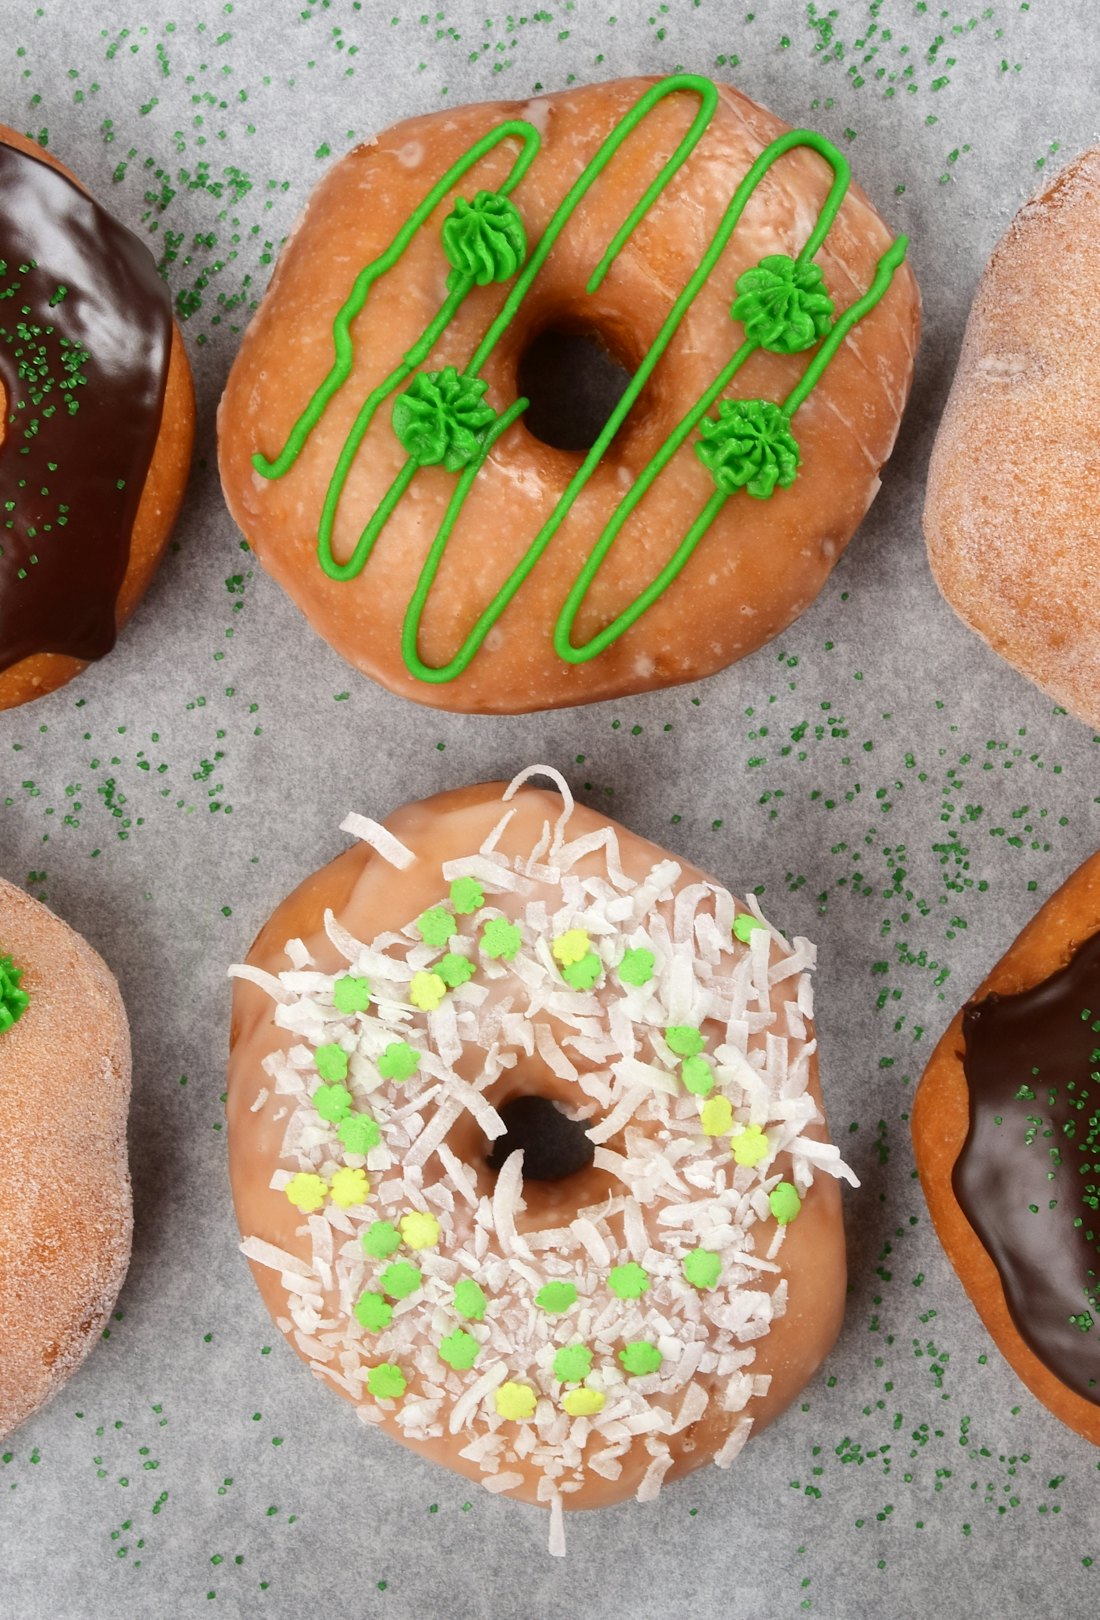 St. Patrick's day doughnuts are the perfect treat.